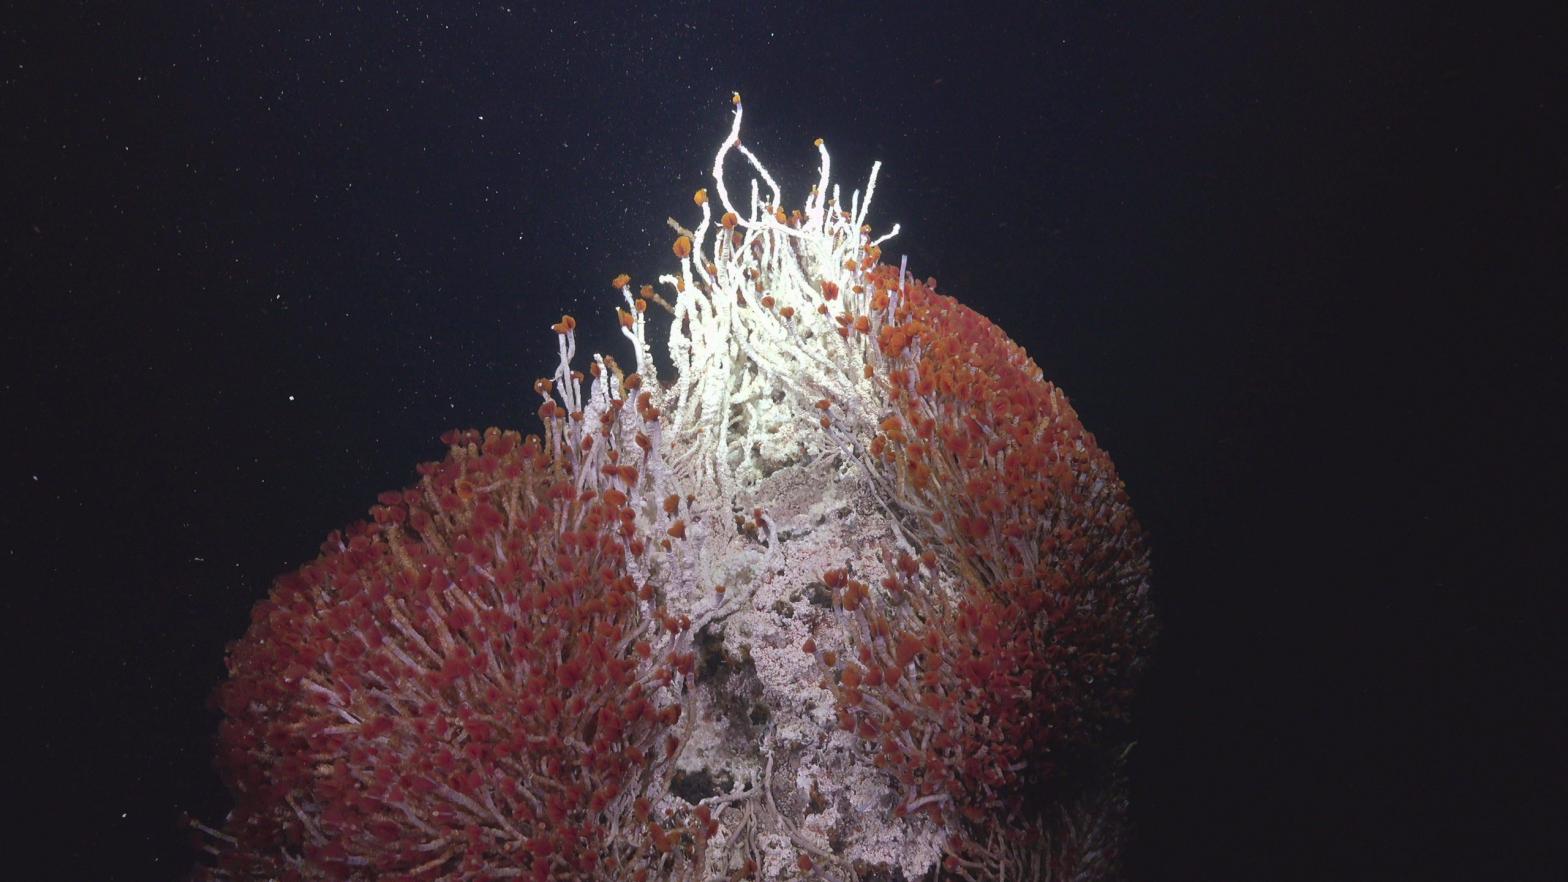 A hydrothermal vent displaying an abundance of red tube worms and white microbial mats.  (Photo: Schmidt Ocean Institute)